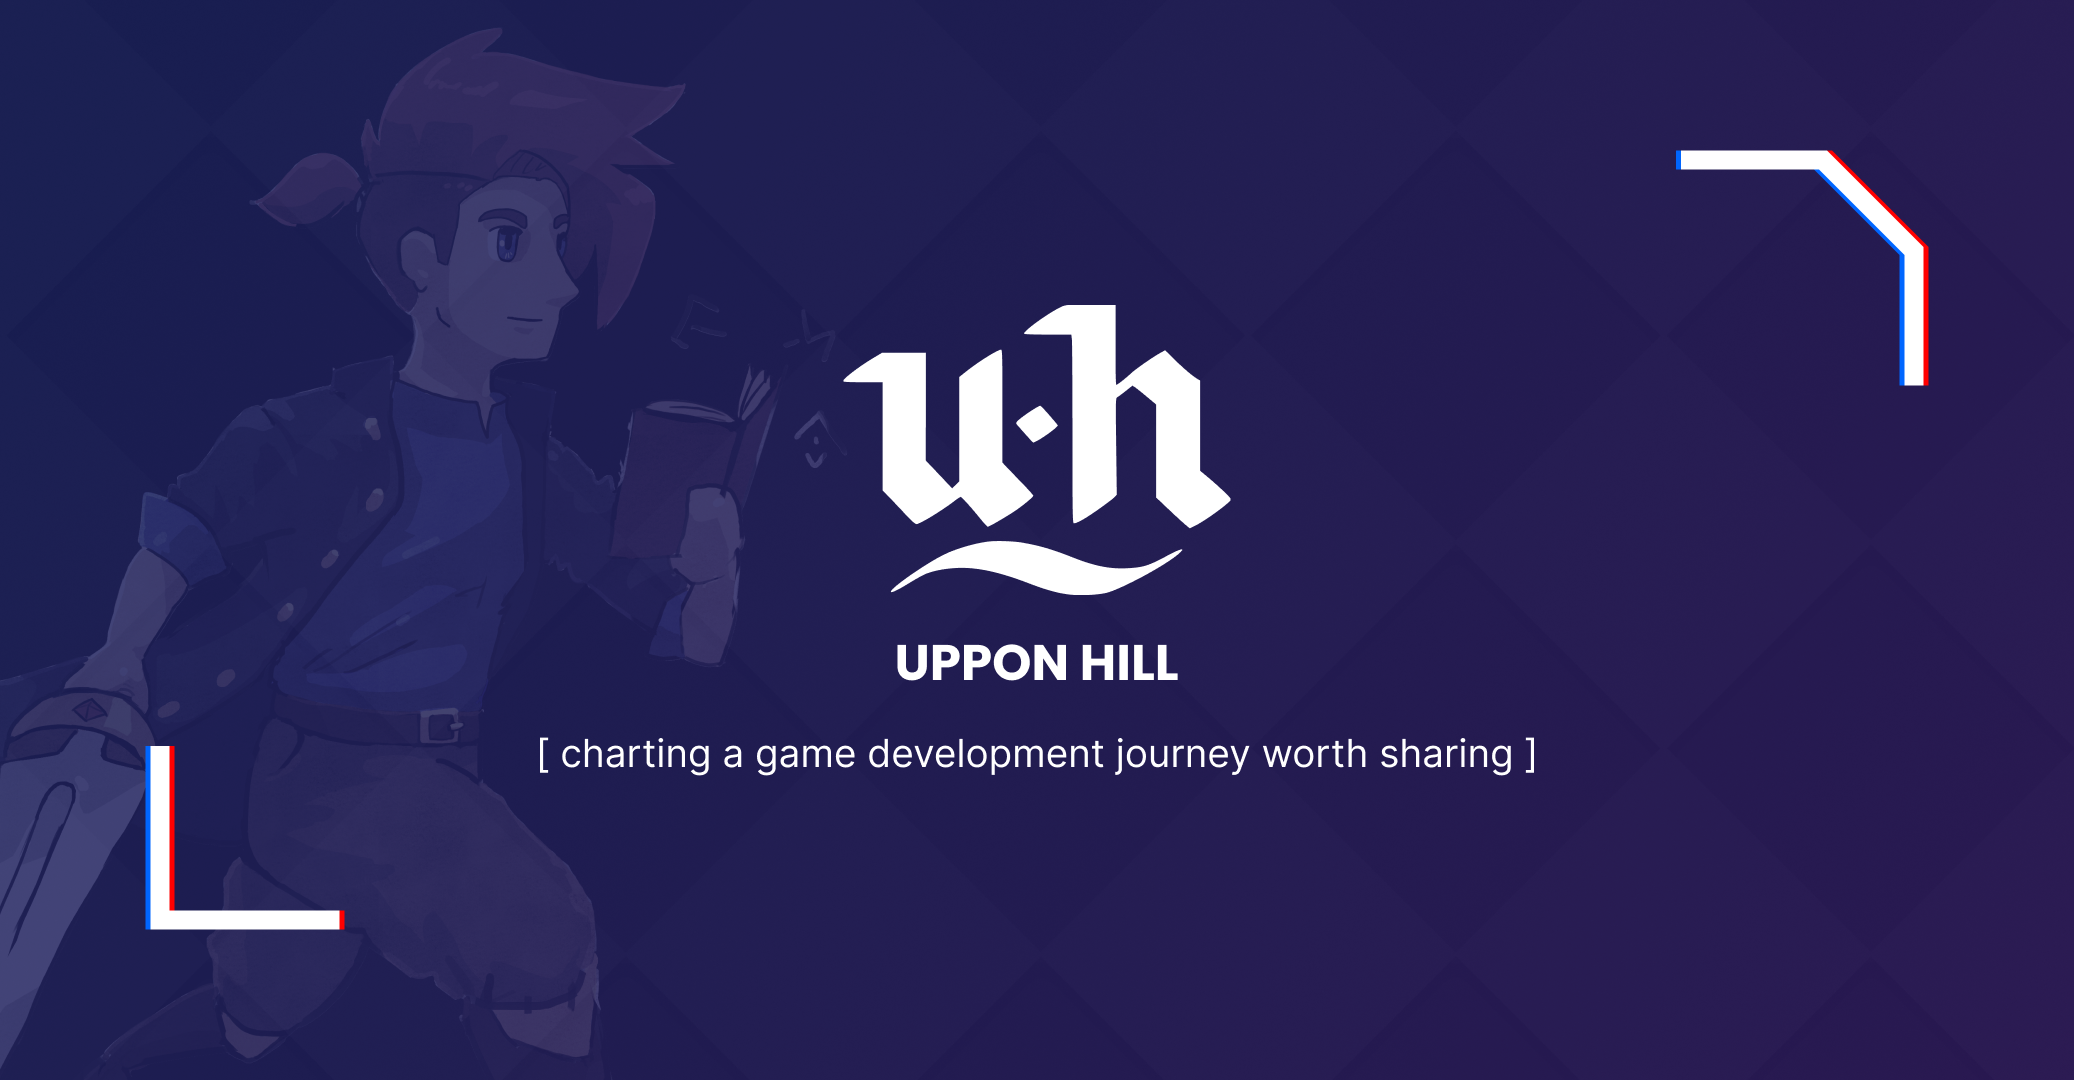 Welcome to Uppon Hill